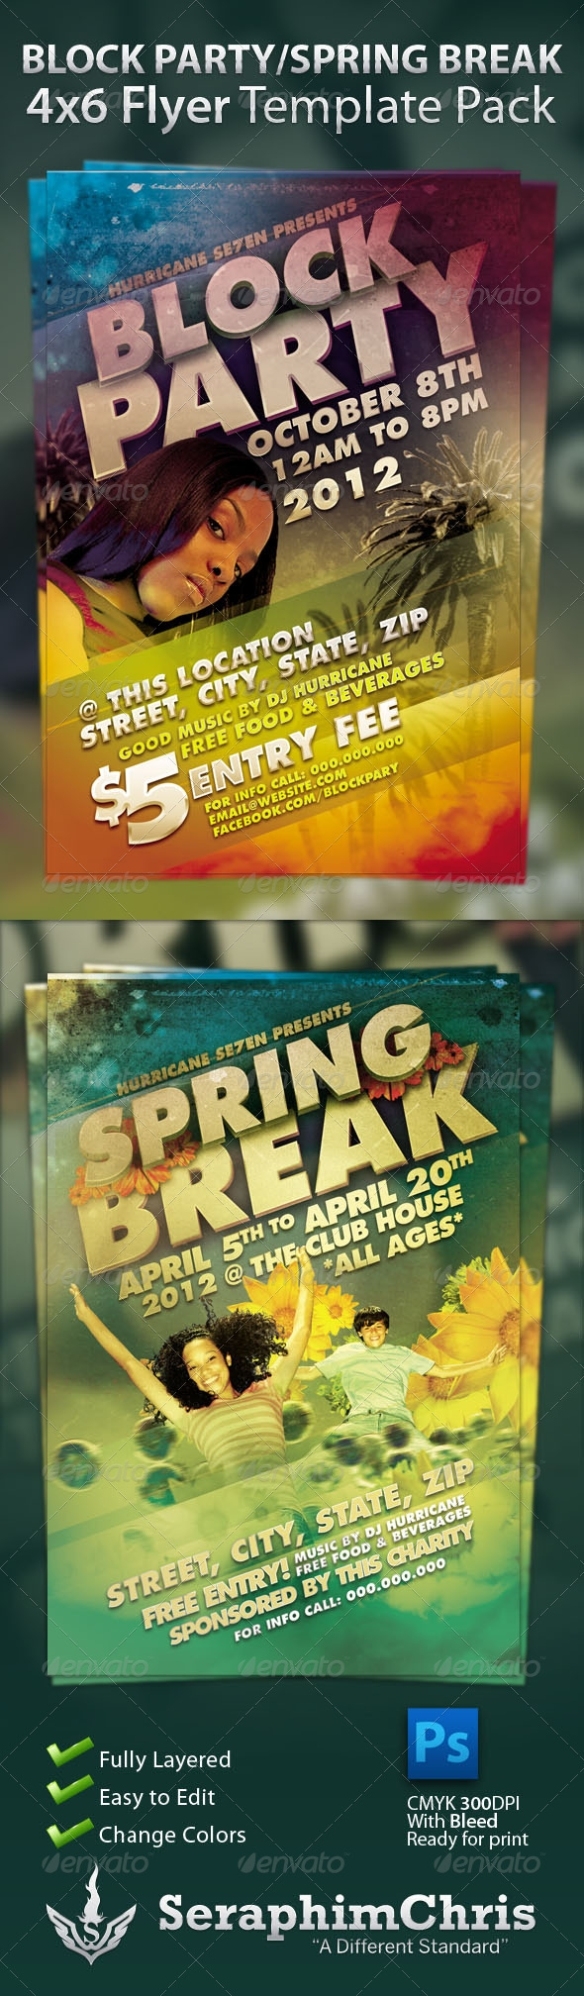 Block Party And Spring Break Flyer Template Pack By Seraphimchris | Graphicriver With Block Party Flyer Template Free